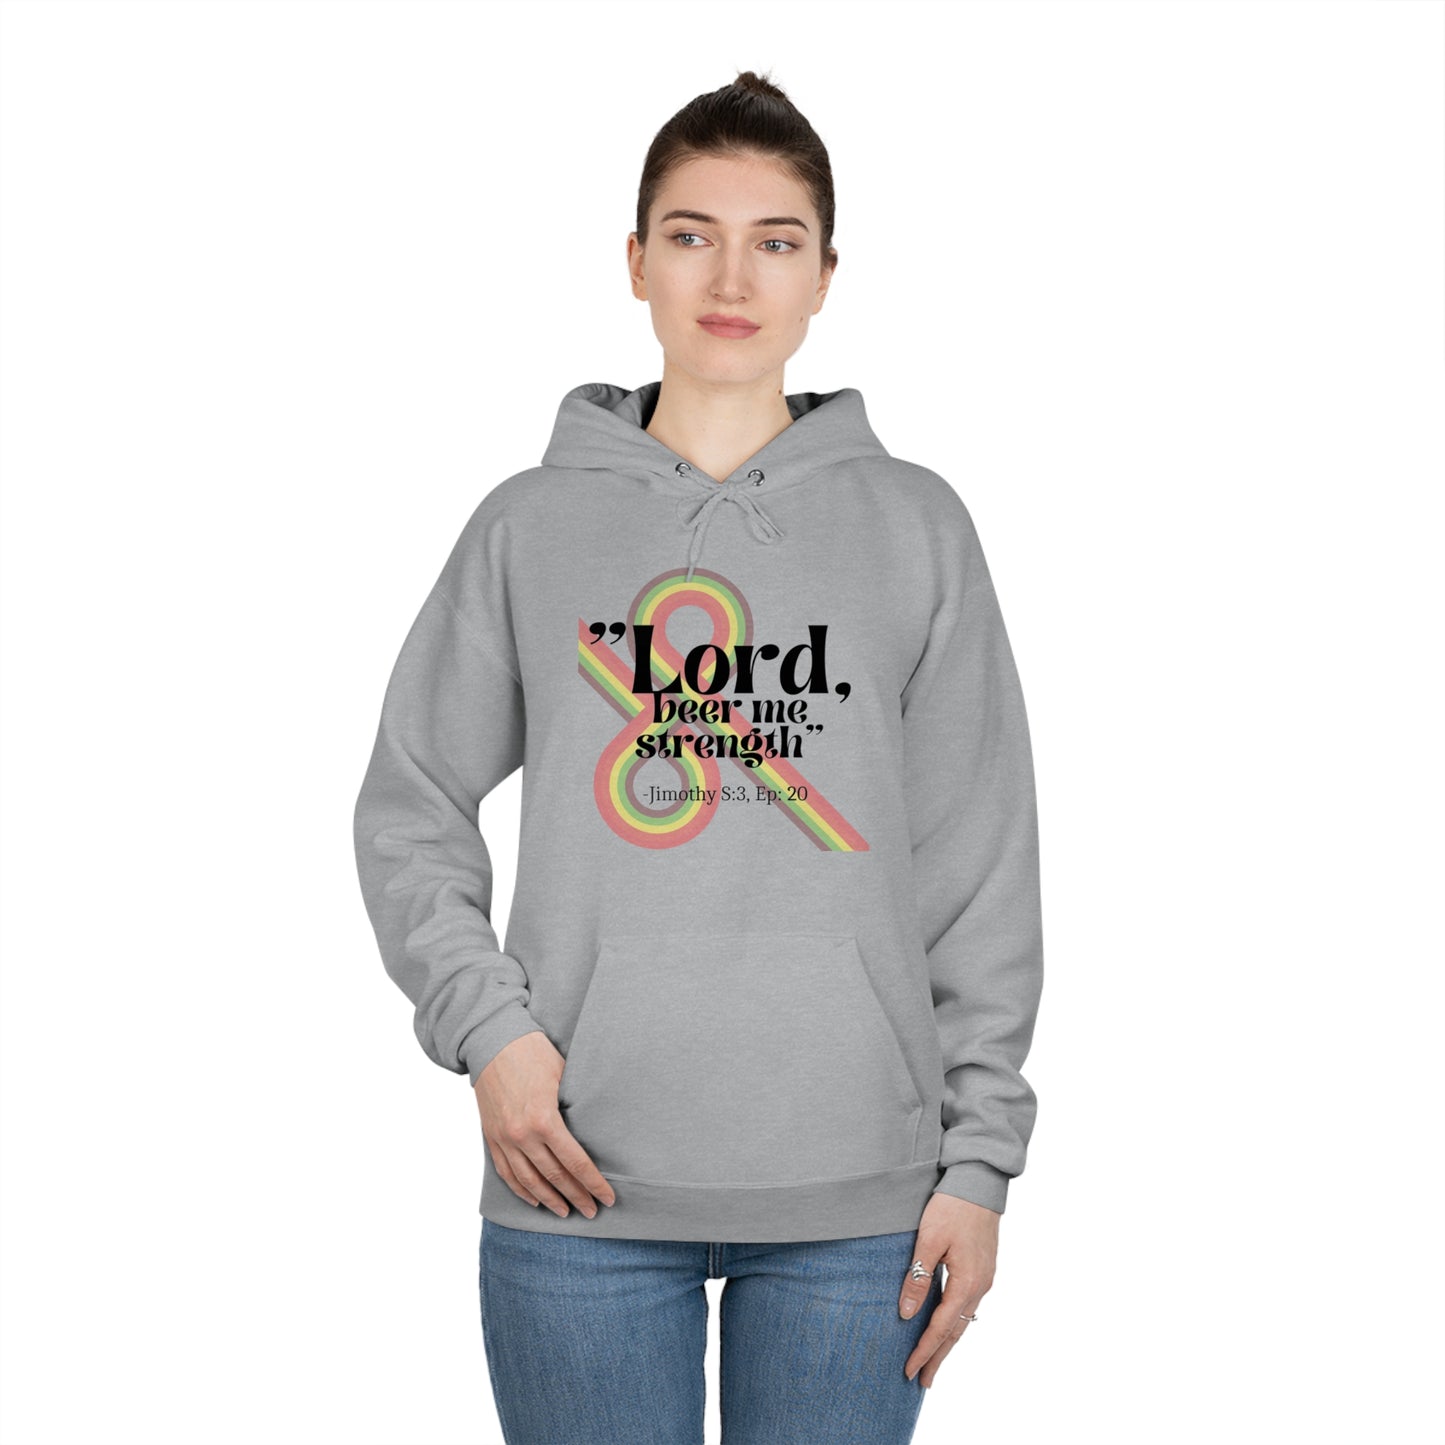 the Office show hoodie - Lord beer me strength quote - Jim Halpert quote hoodie - the Office fan gift